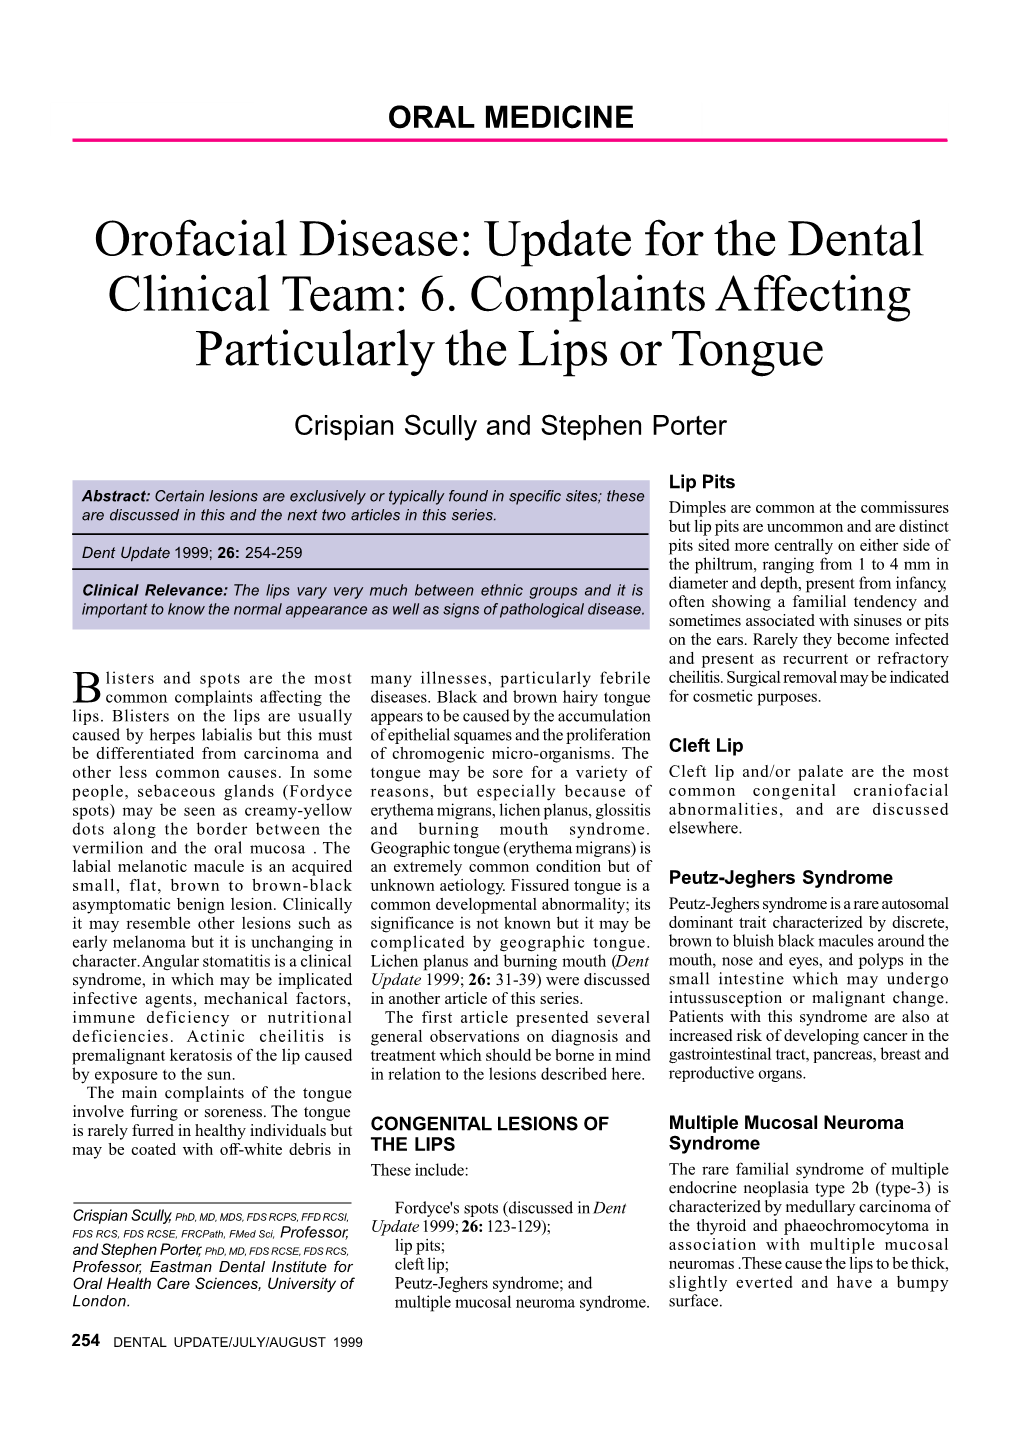 Orofacial Disease: Update for the Dental Clinical Team: 6. Complaints Affecting Particularly the Lips Or Tongue